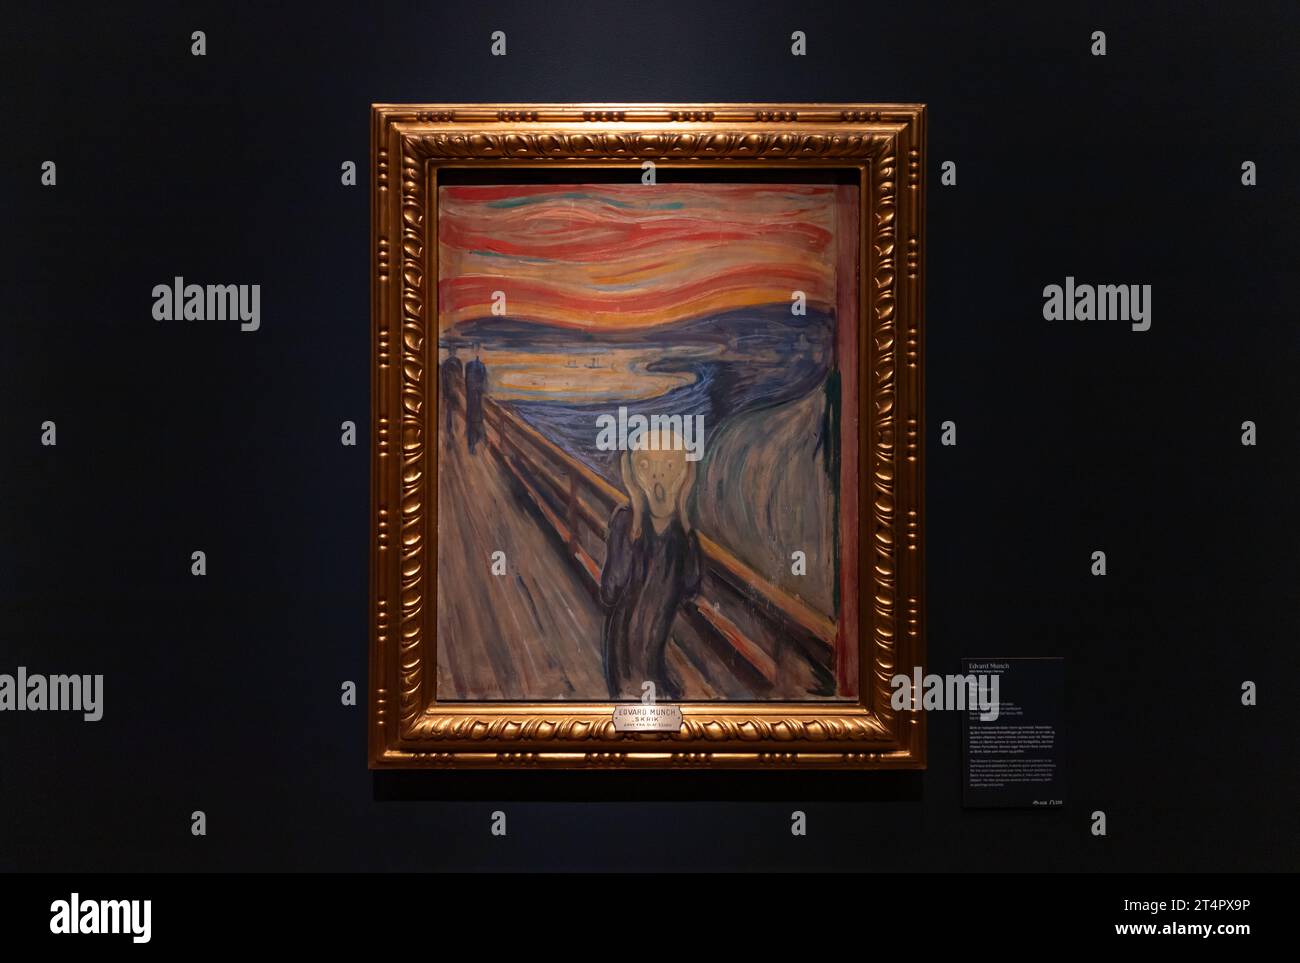 A picture of one of the variations of the iconic Scream painting, by Edvard Munch, at the Collection exhibition of the National Museum of Oslo. Stock Photo